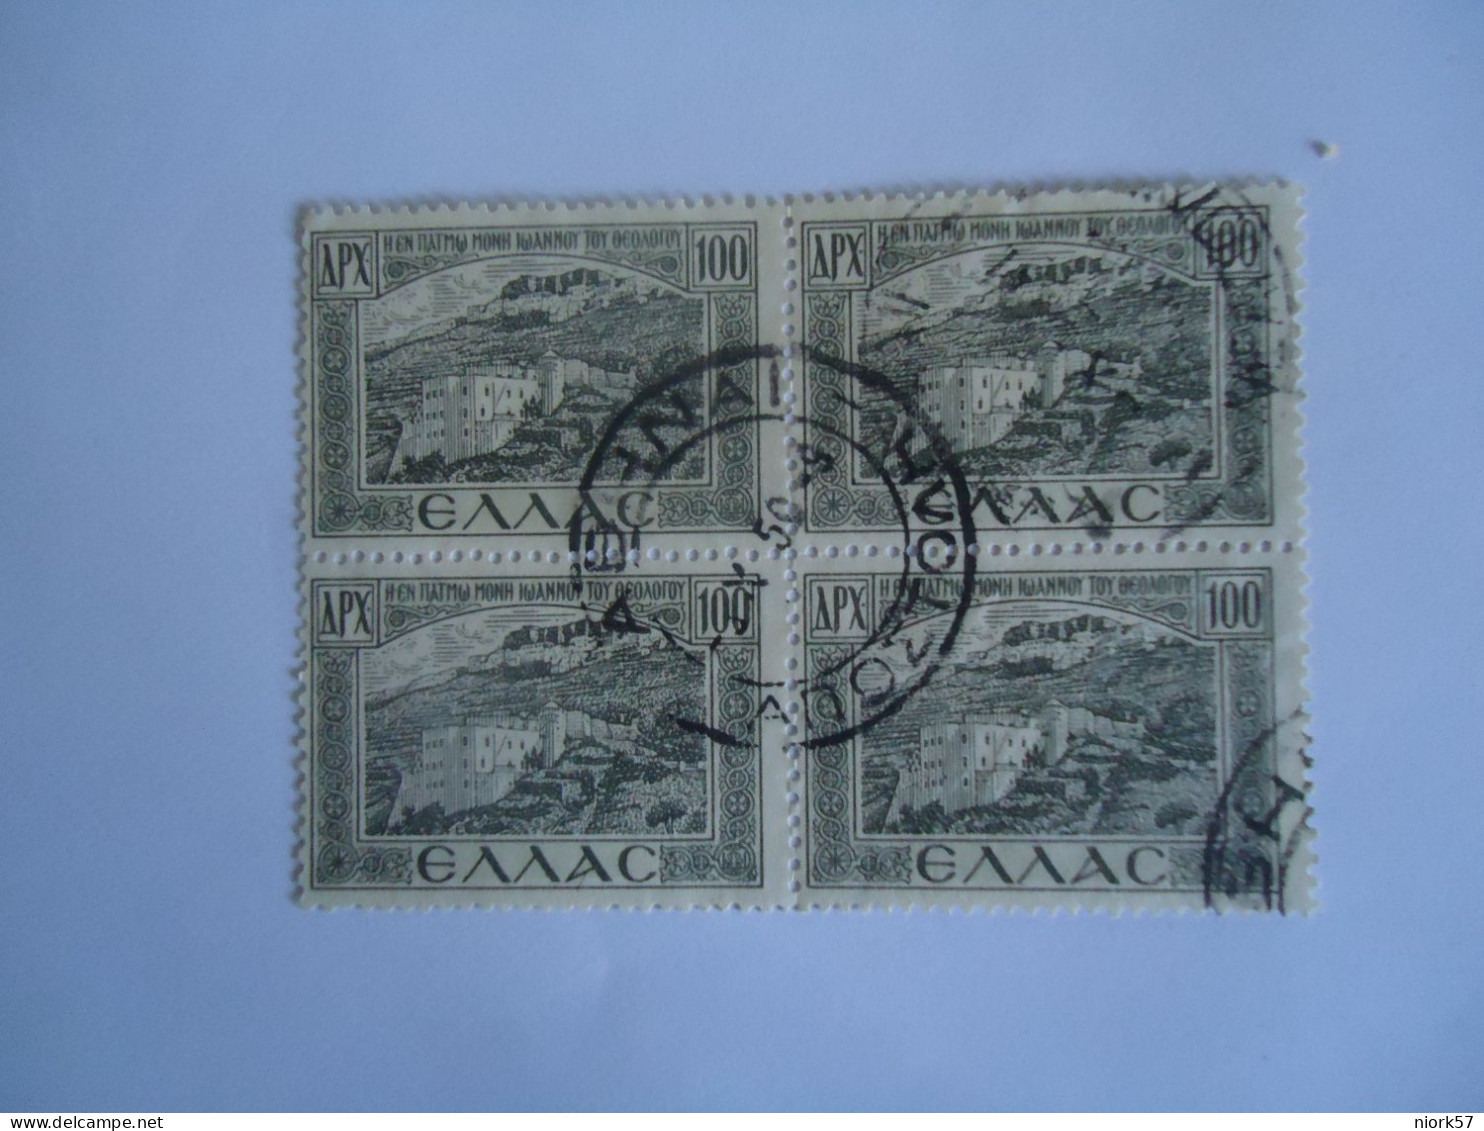 GREECE USED STAMPS 1937 ΤΟΠΙΑ   BLOCK OF 4 POSTMARK  ΑΘΗΝΑΙ - Oblitérés